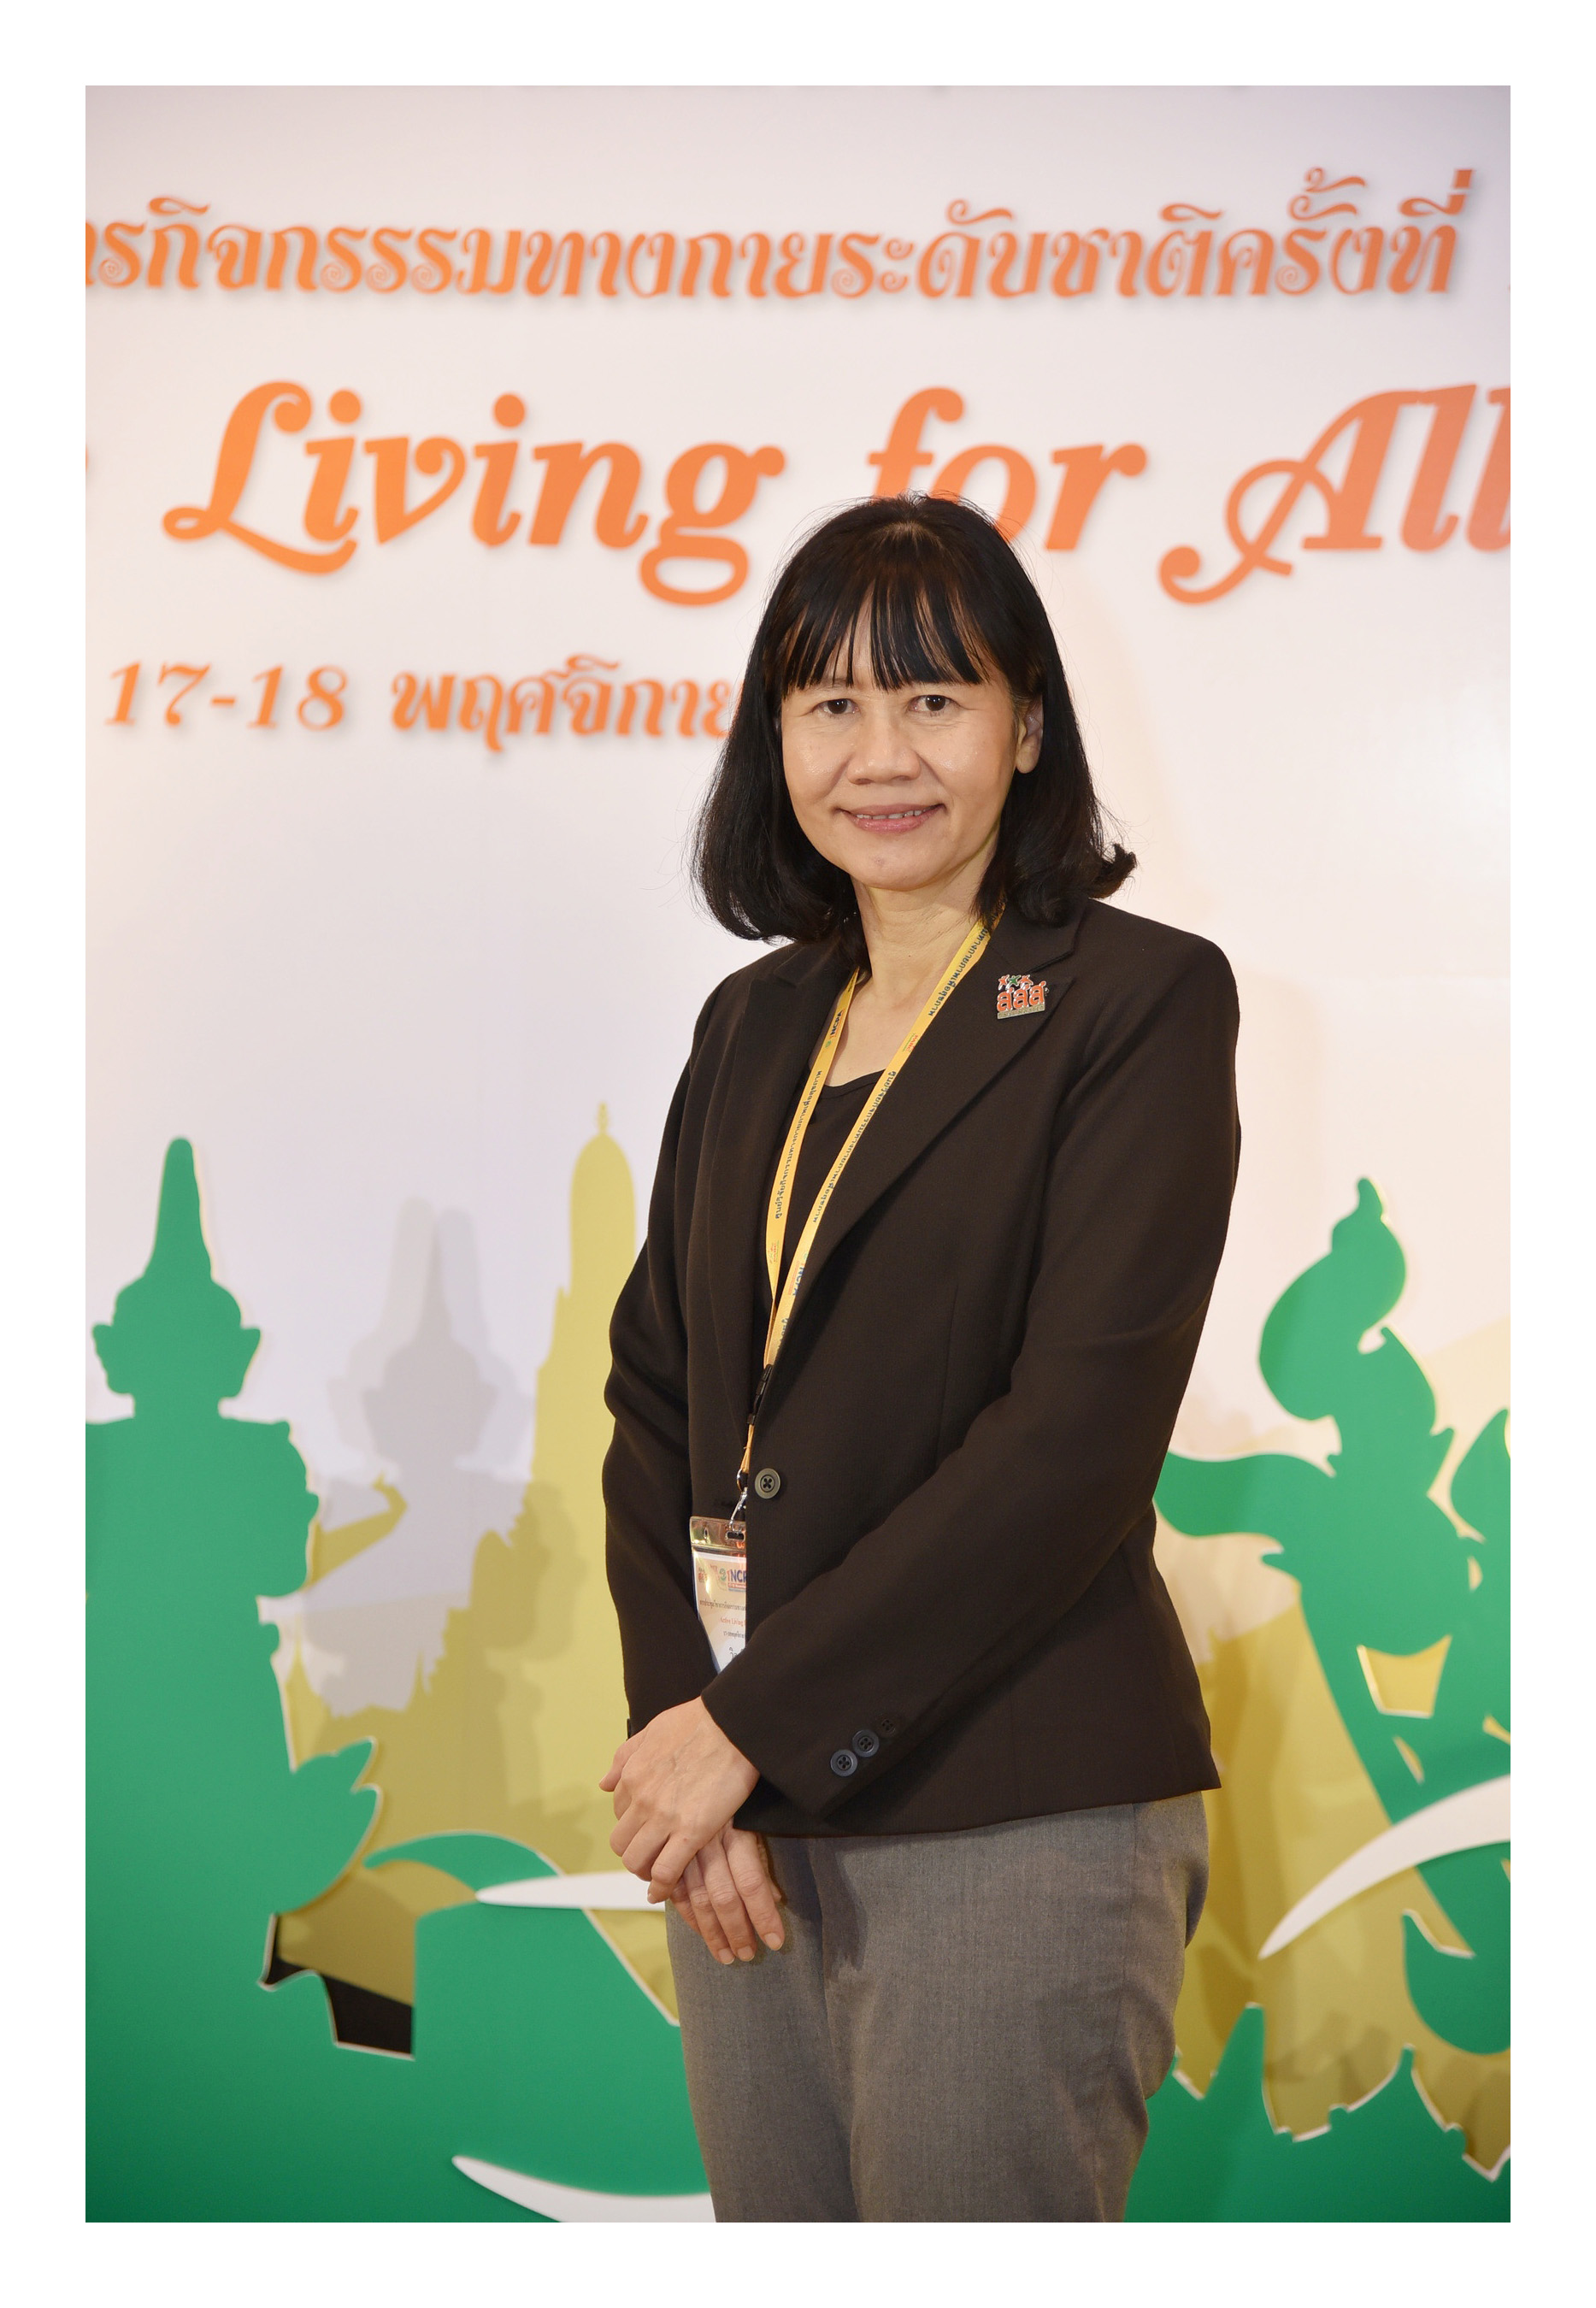 National Conference on Physical Activity calls on Thai people to move their bodies.